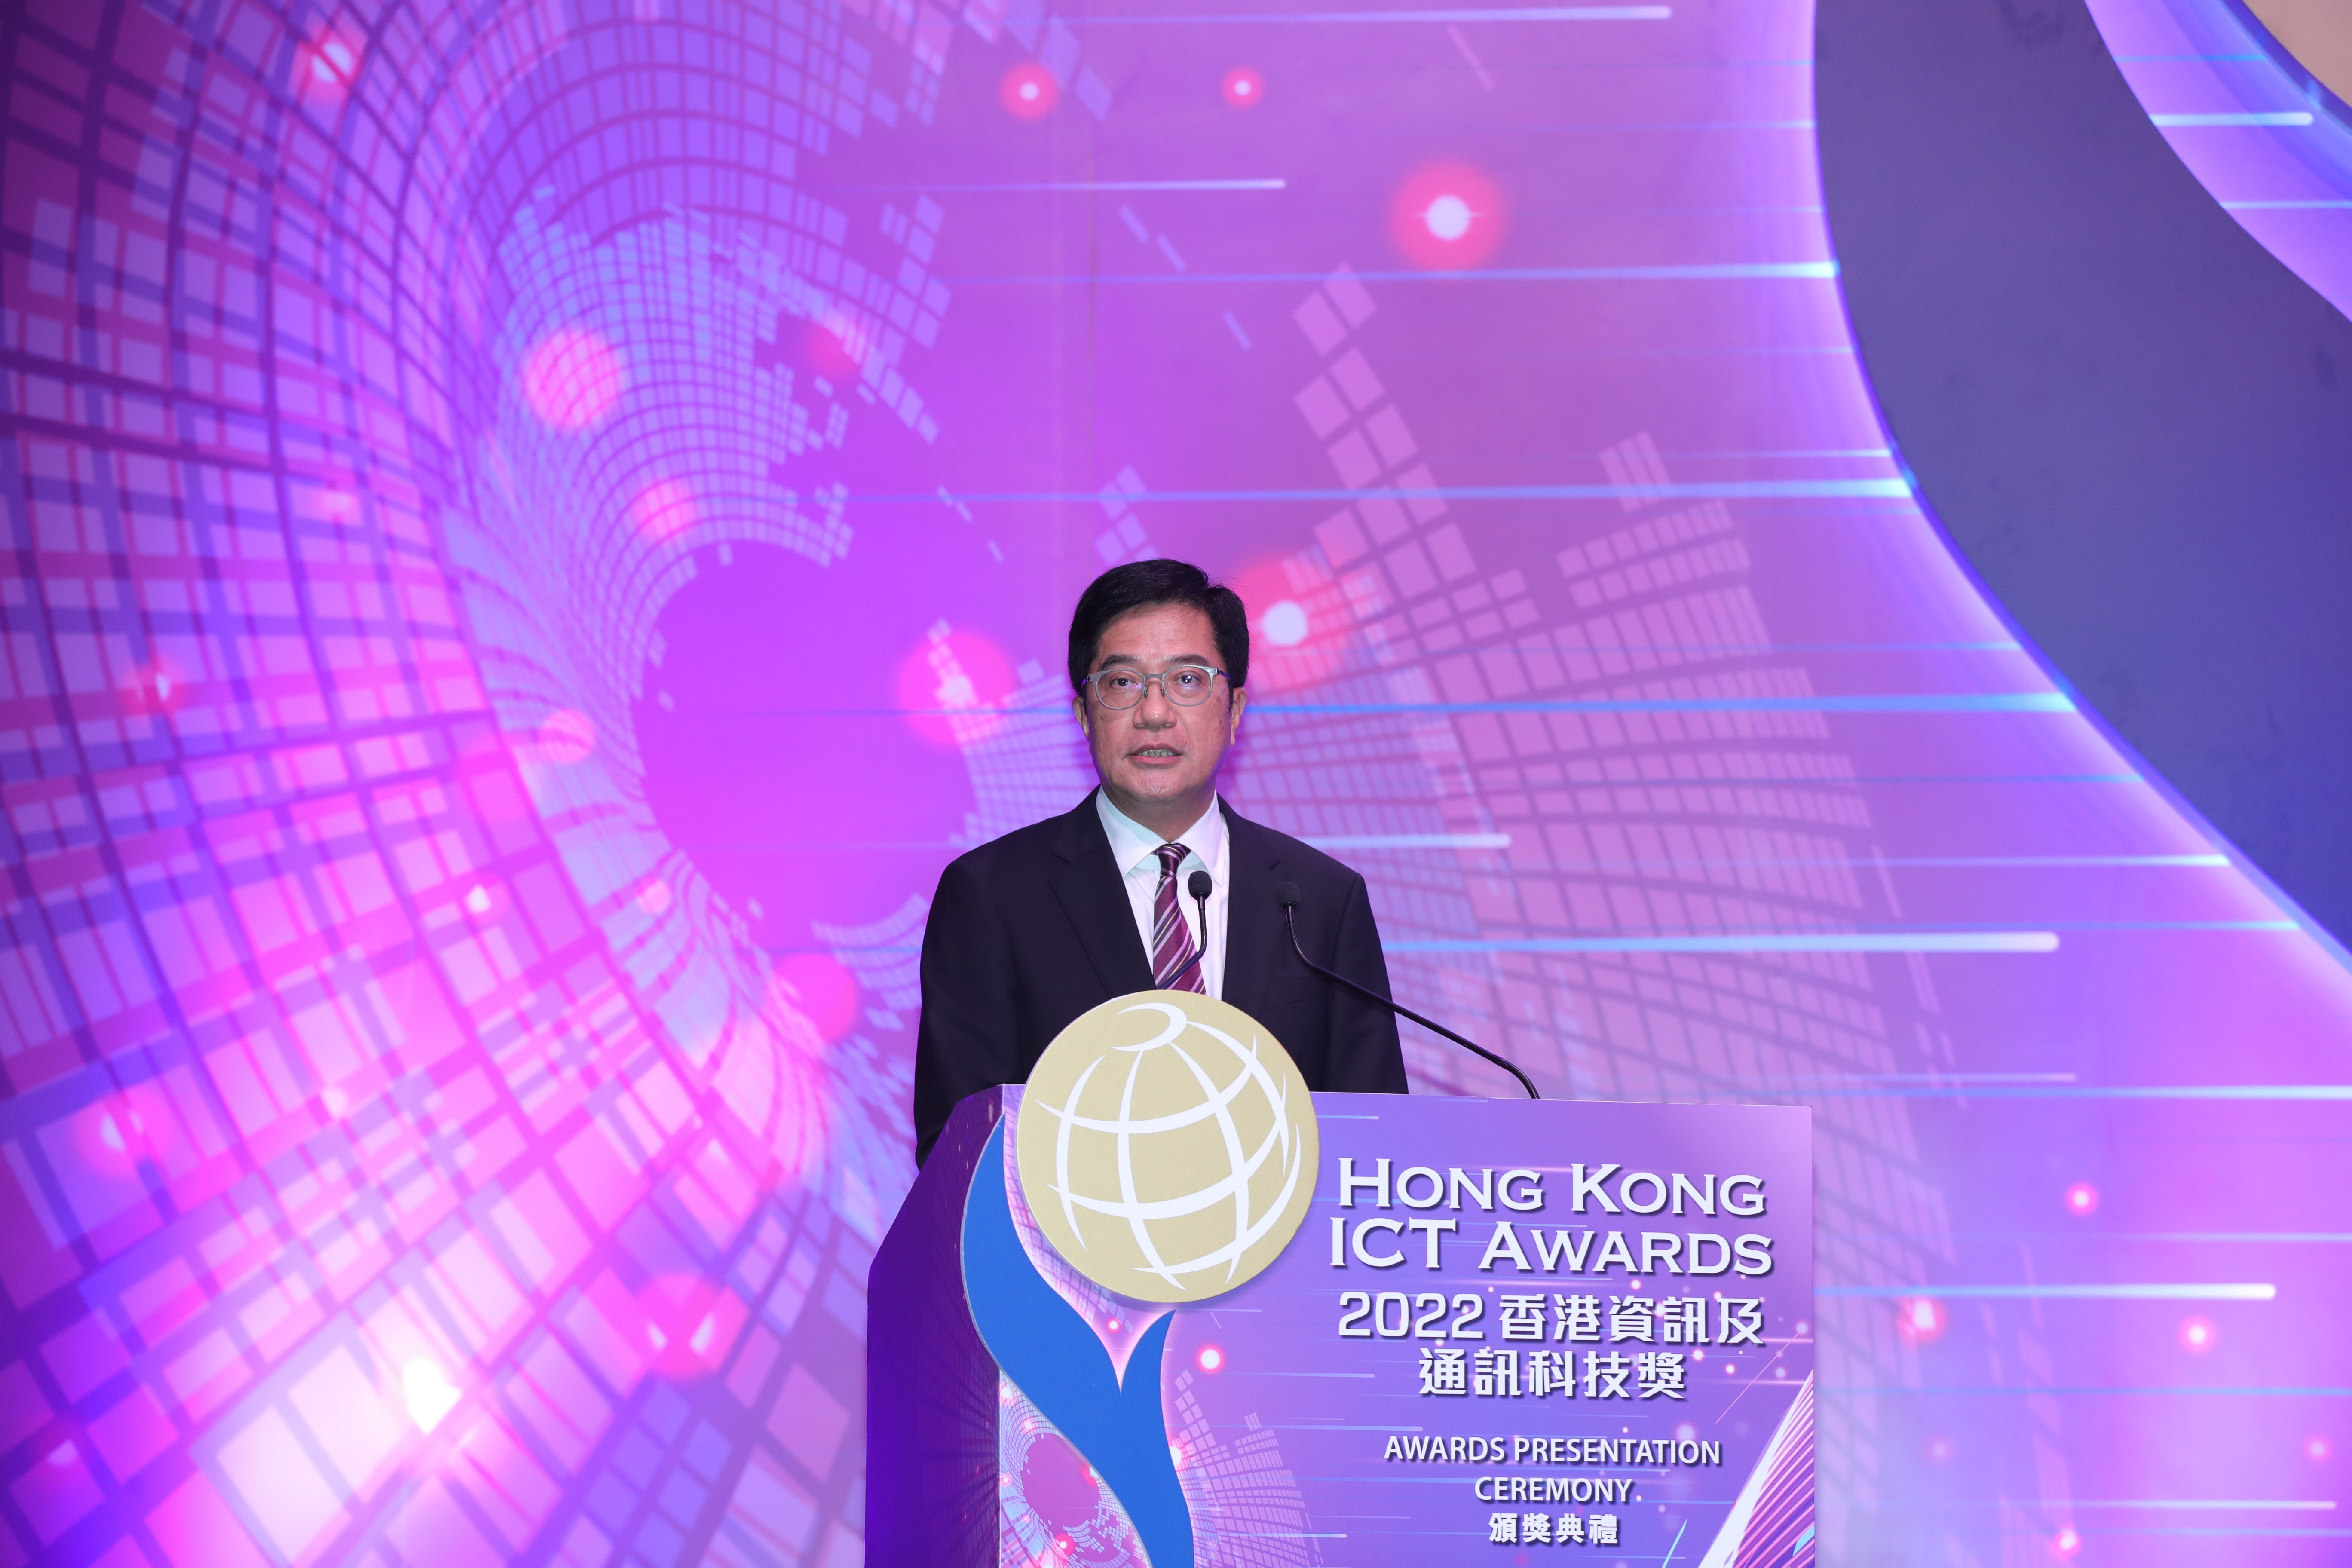 Hong Kong ICT Awards 2022 Awards Presentation Ceremony, Opening Remarks by Guest of Honour